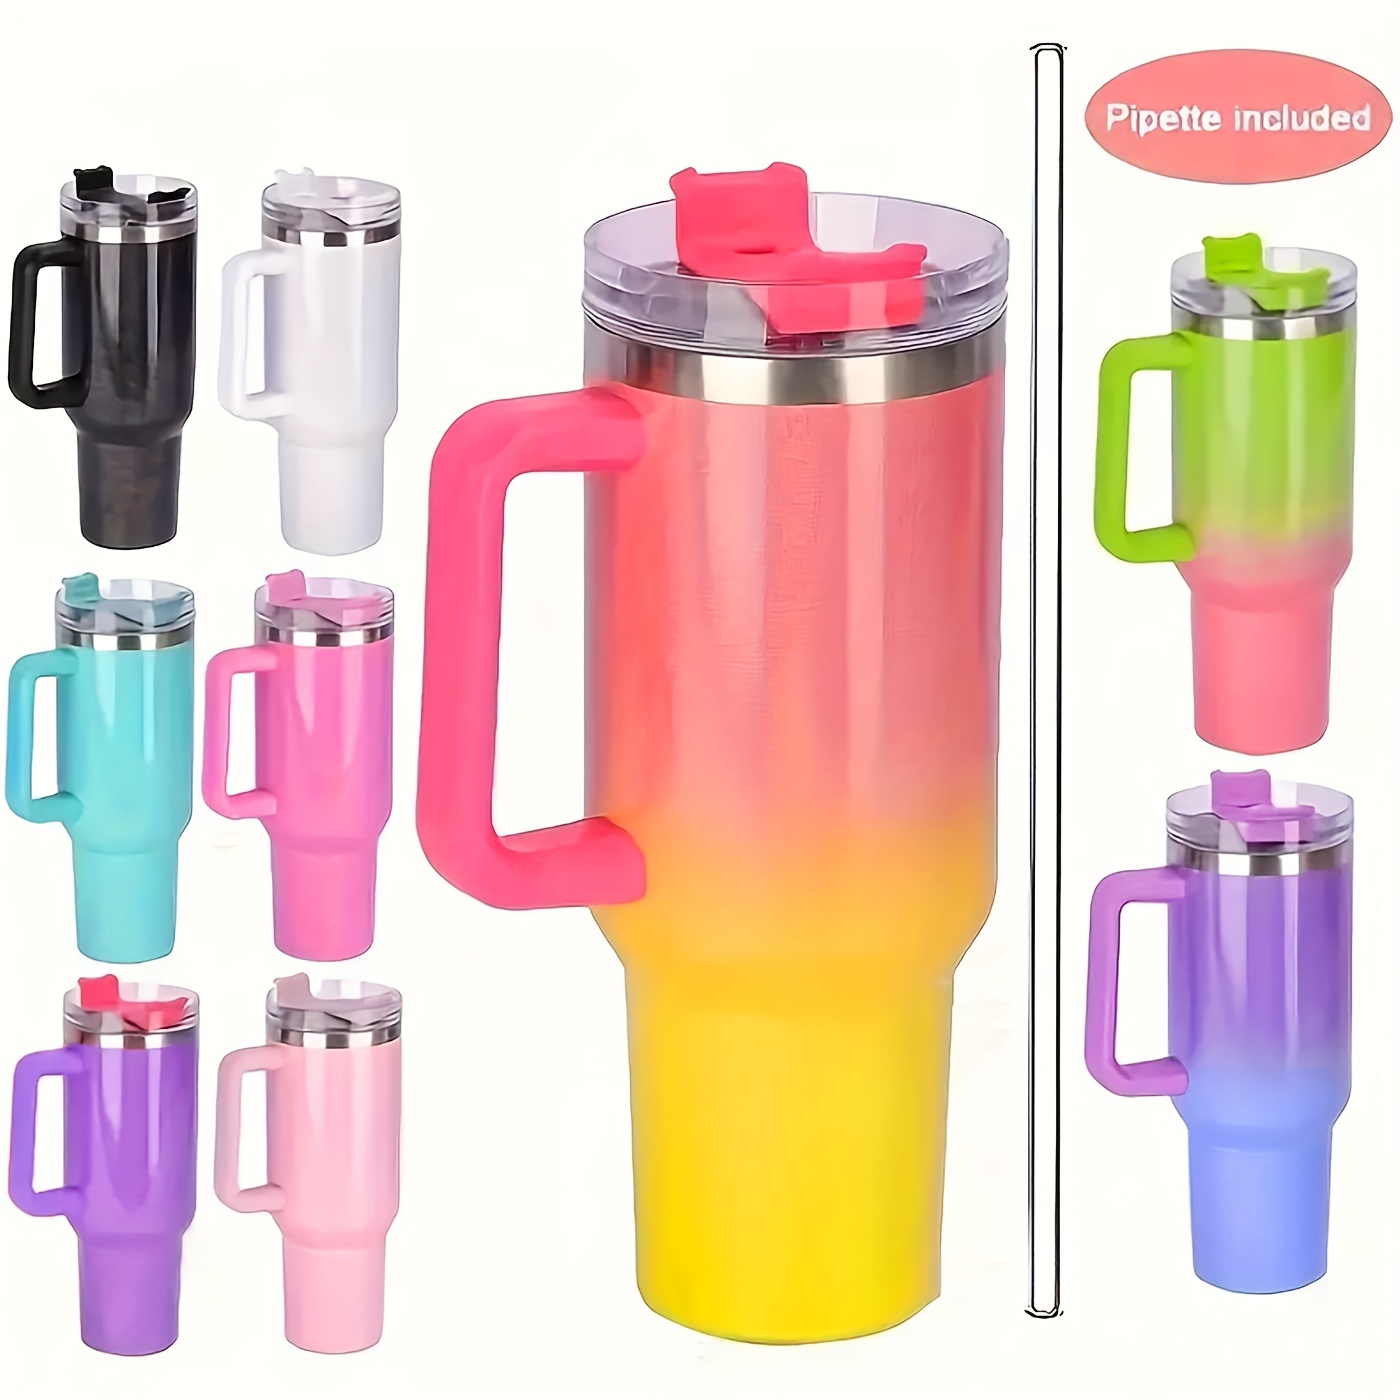 https://img.kwcdn.com/product/stainless-steel-insulated-water-bottle/d69d2f15w98k18-9ea86c39/Fancyalgo/VirtualModelMatting/8645ad4ce63482c0f03db052f6a32f3a.jpg?imageView2/2/w/500/q/60/format/webp